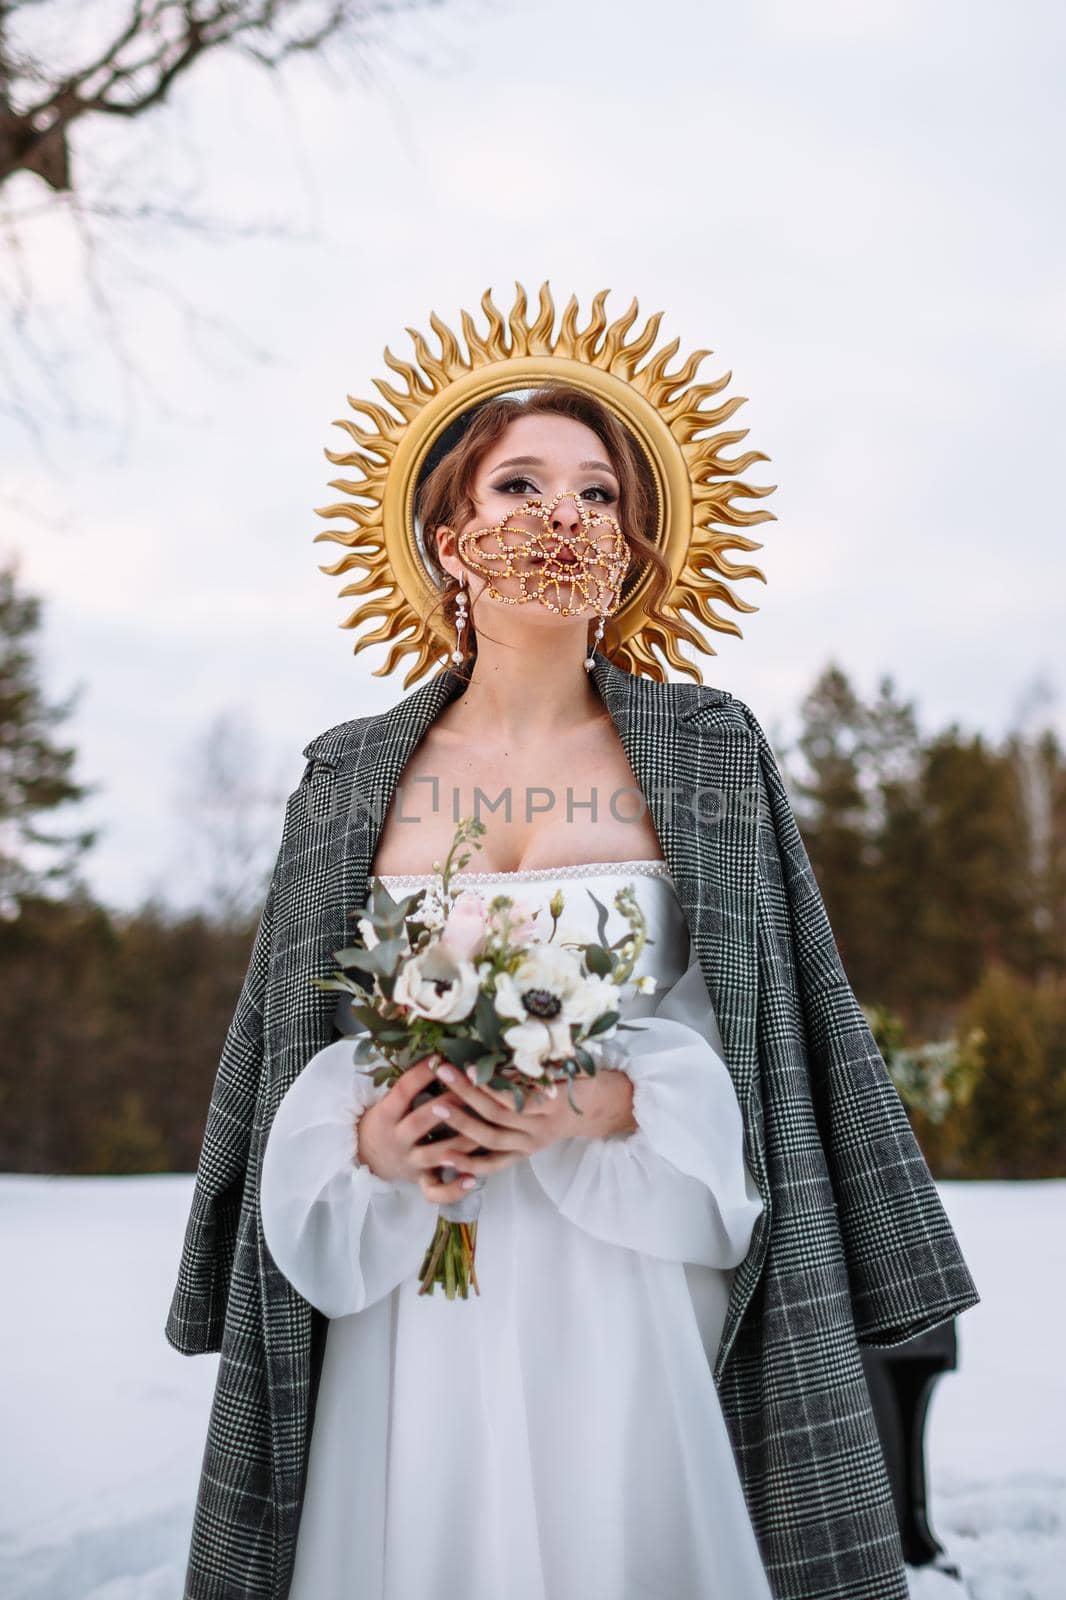 The bride is standing in a snow-covered forest. The bride in a fabulous protective mask. Above the bride is a halo by deandy